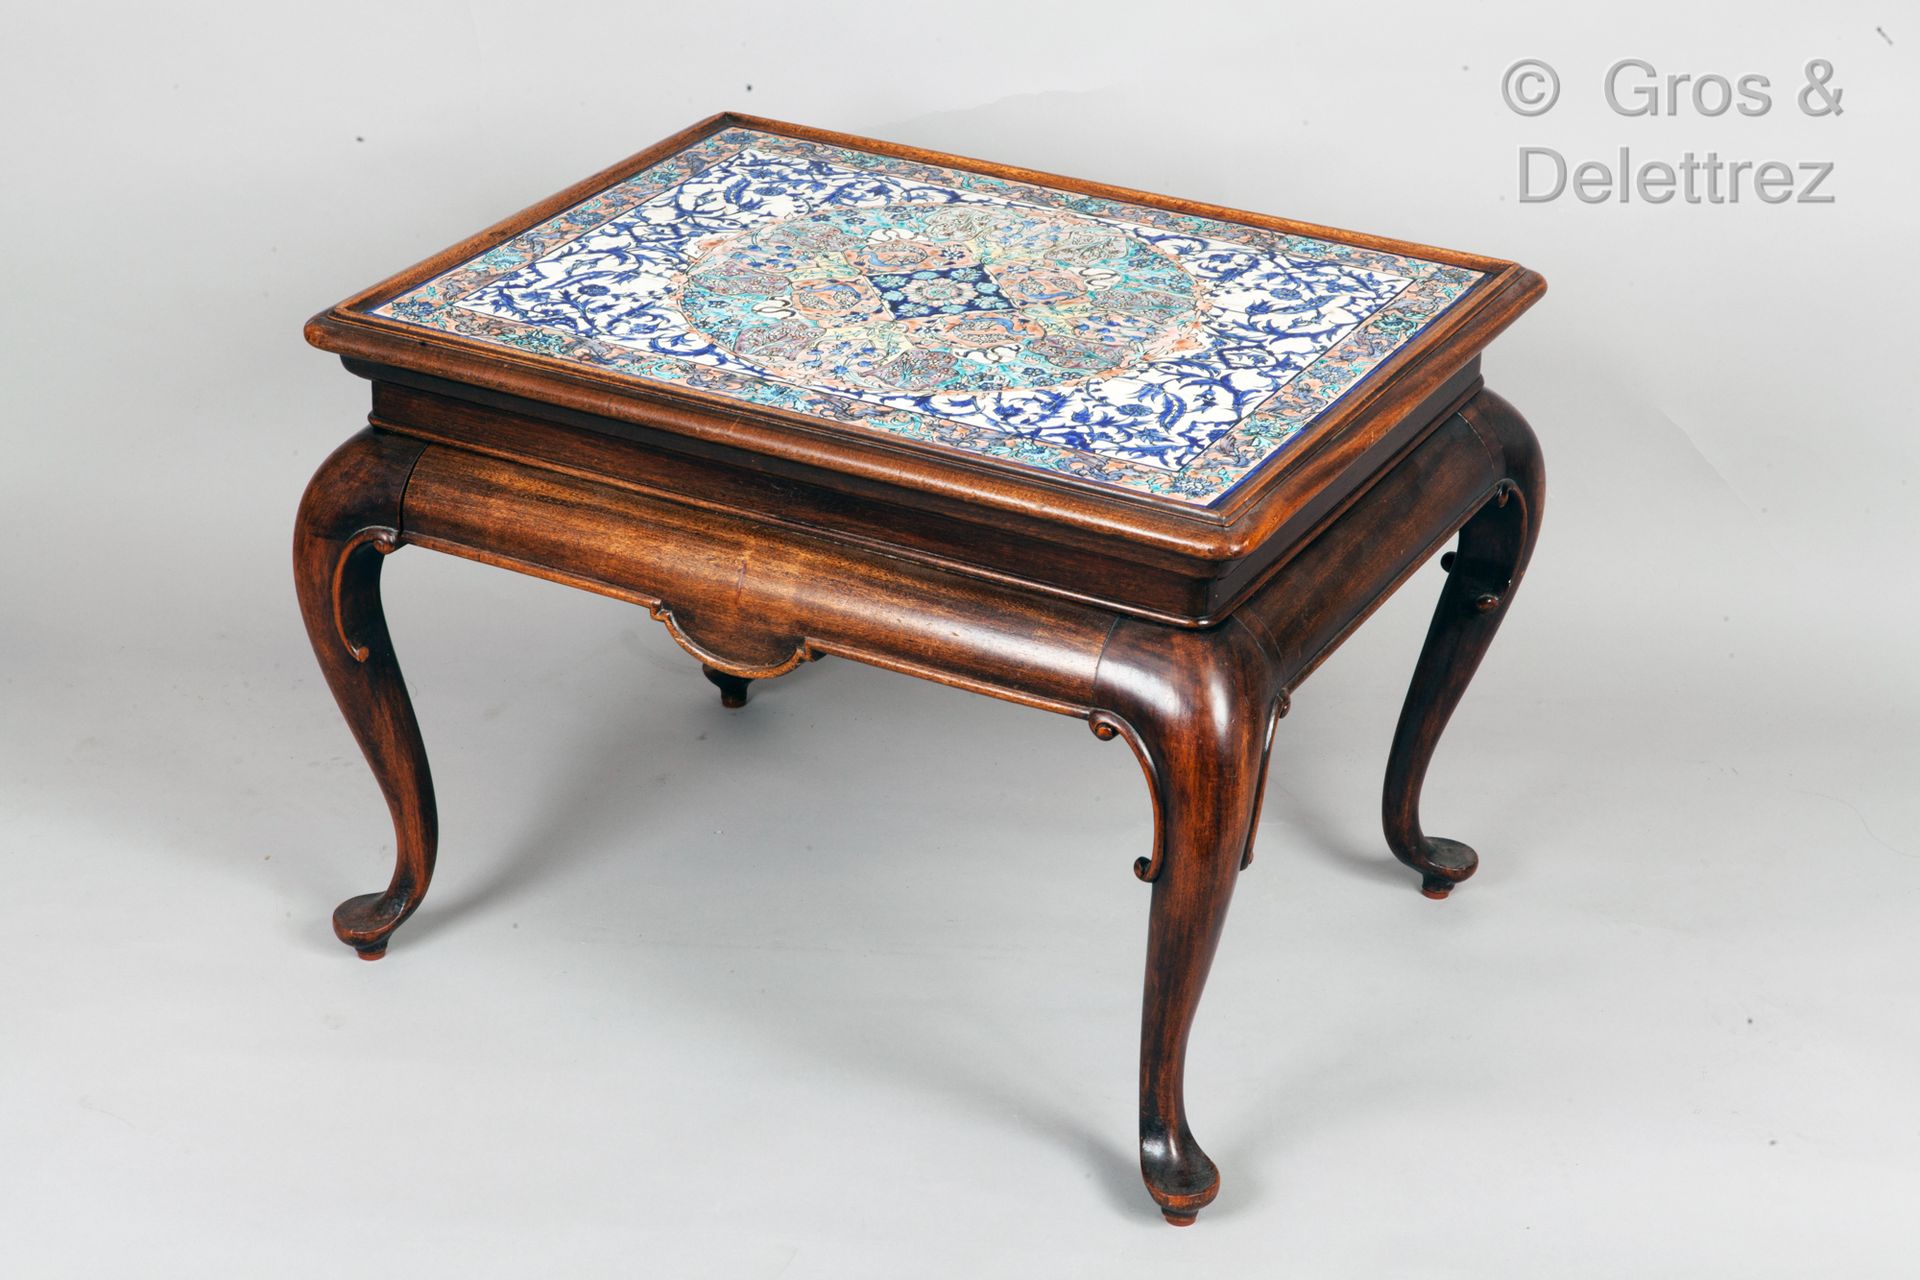 Null A coffee table with ceramic tiles in Safavid style, signed by M. Carrillo

&hellip;